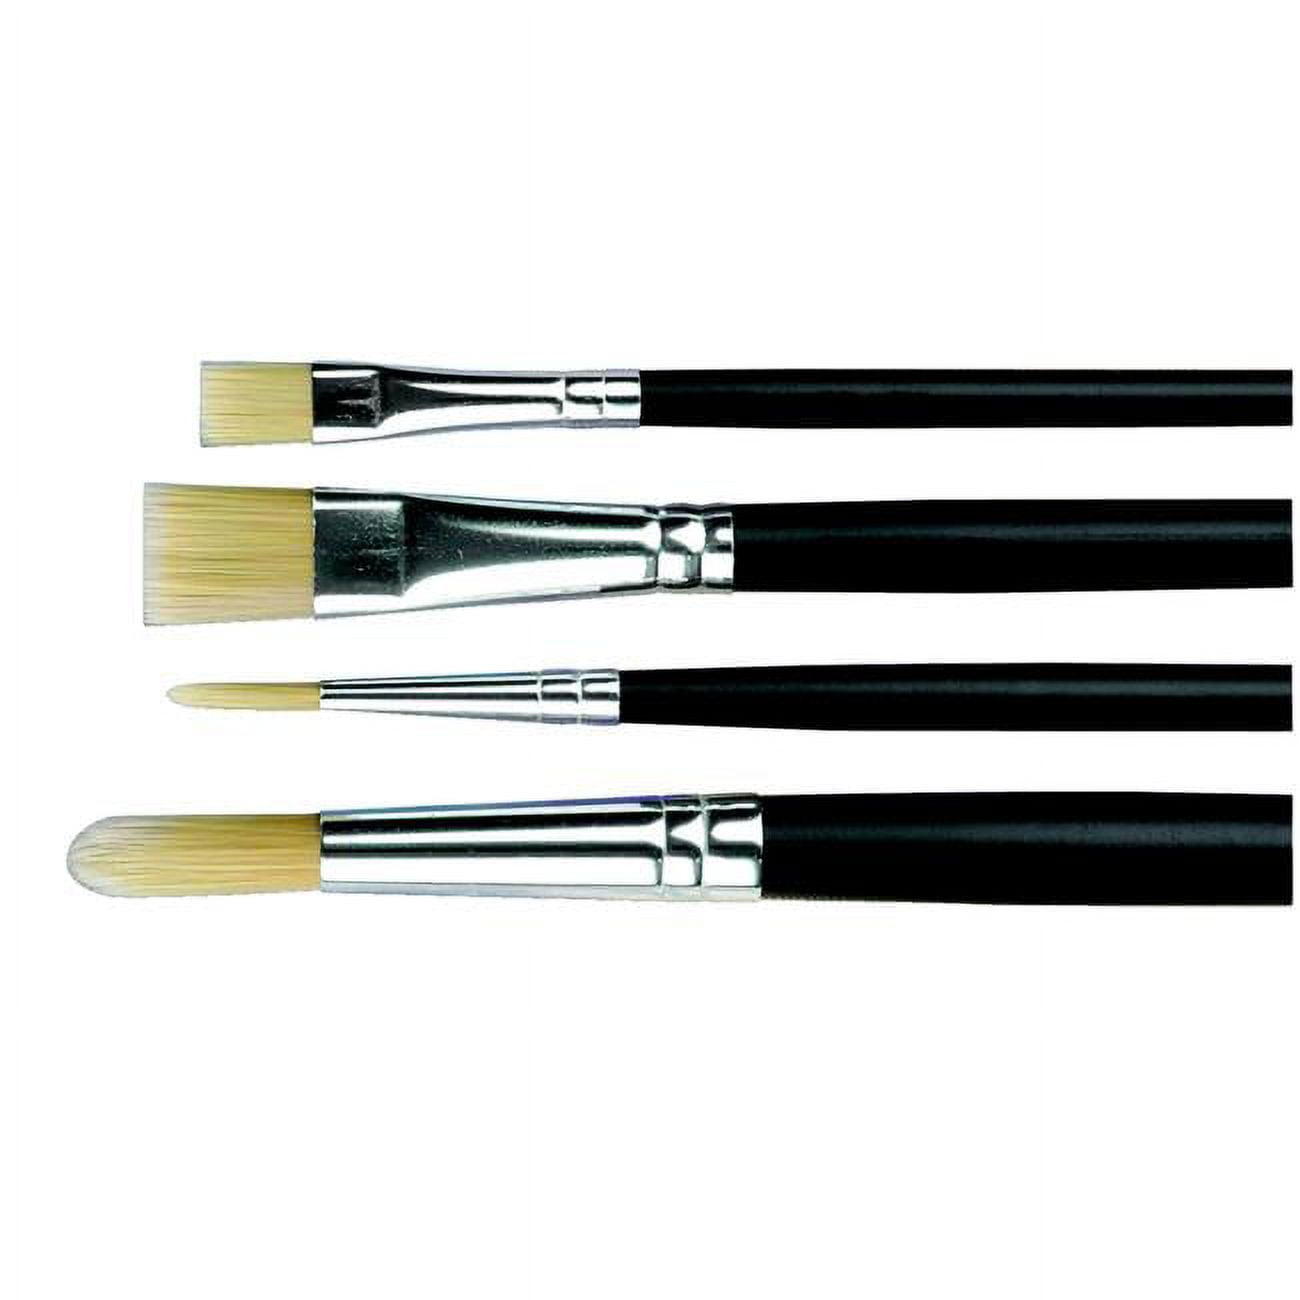 Sax Phoenix Golden Synthetic Long Handle Brushes, Flat, Size 6, Pack of 6